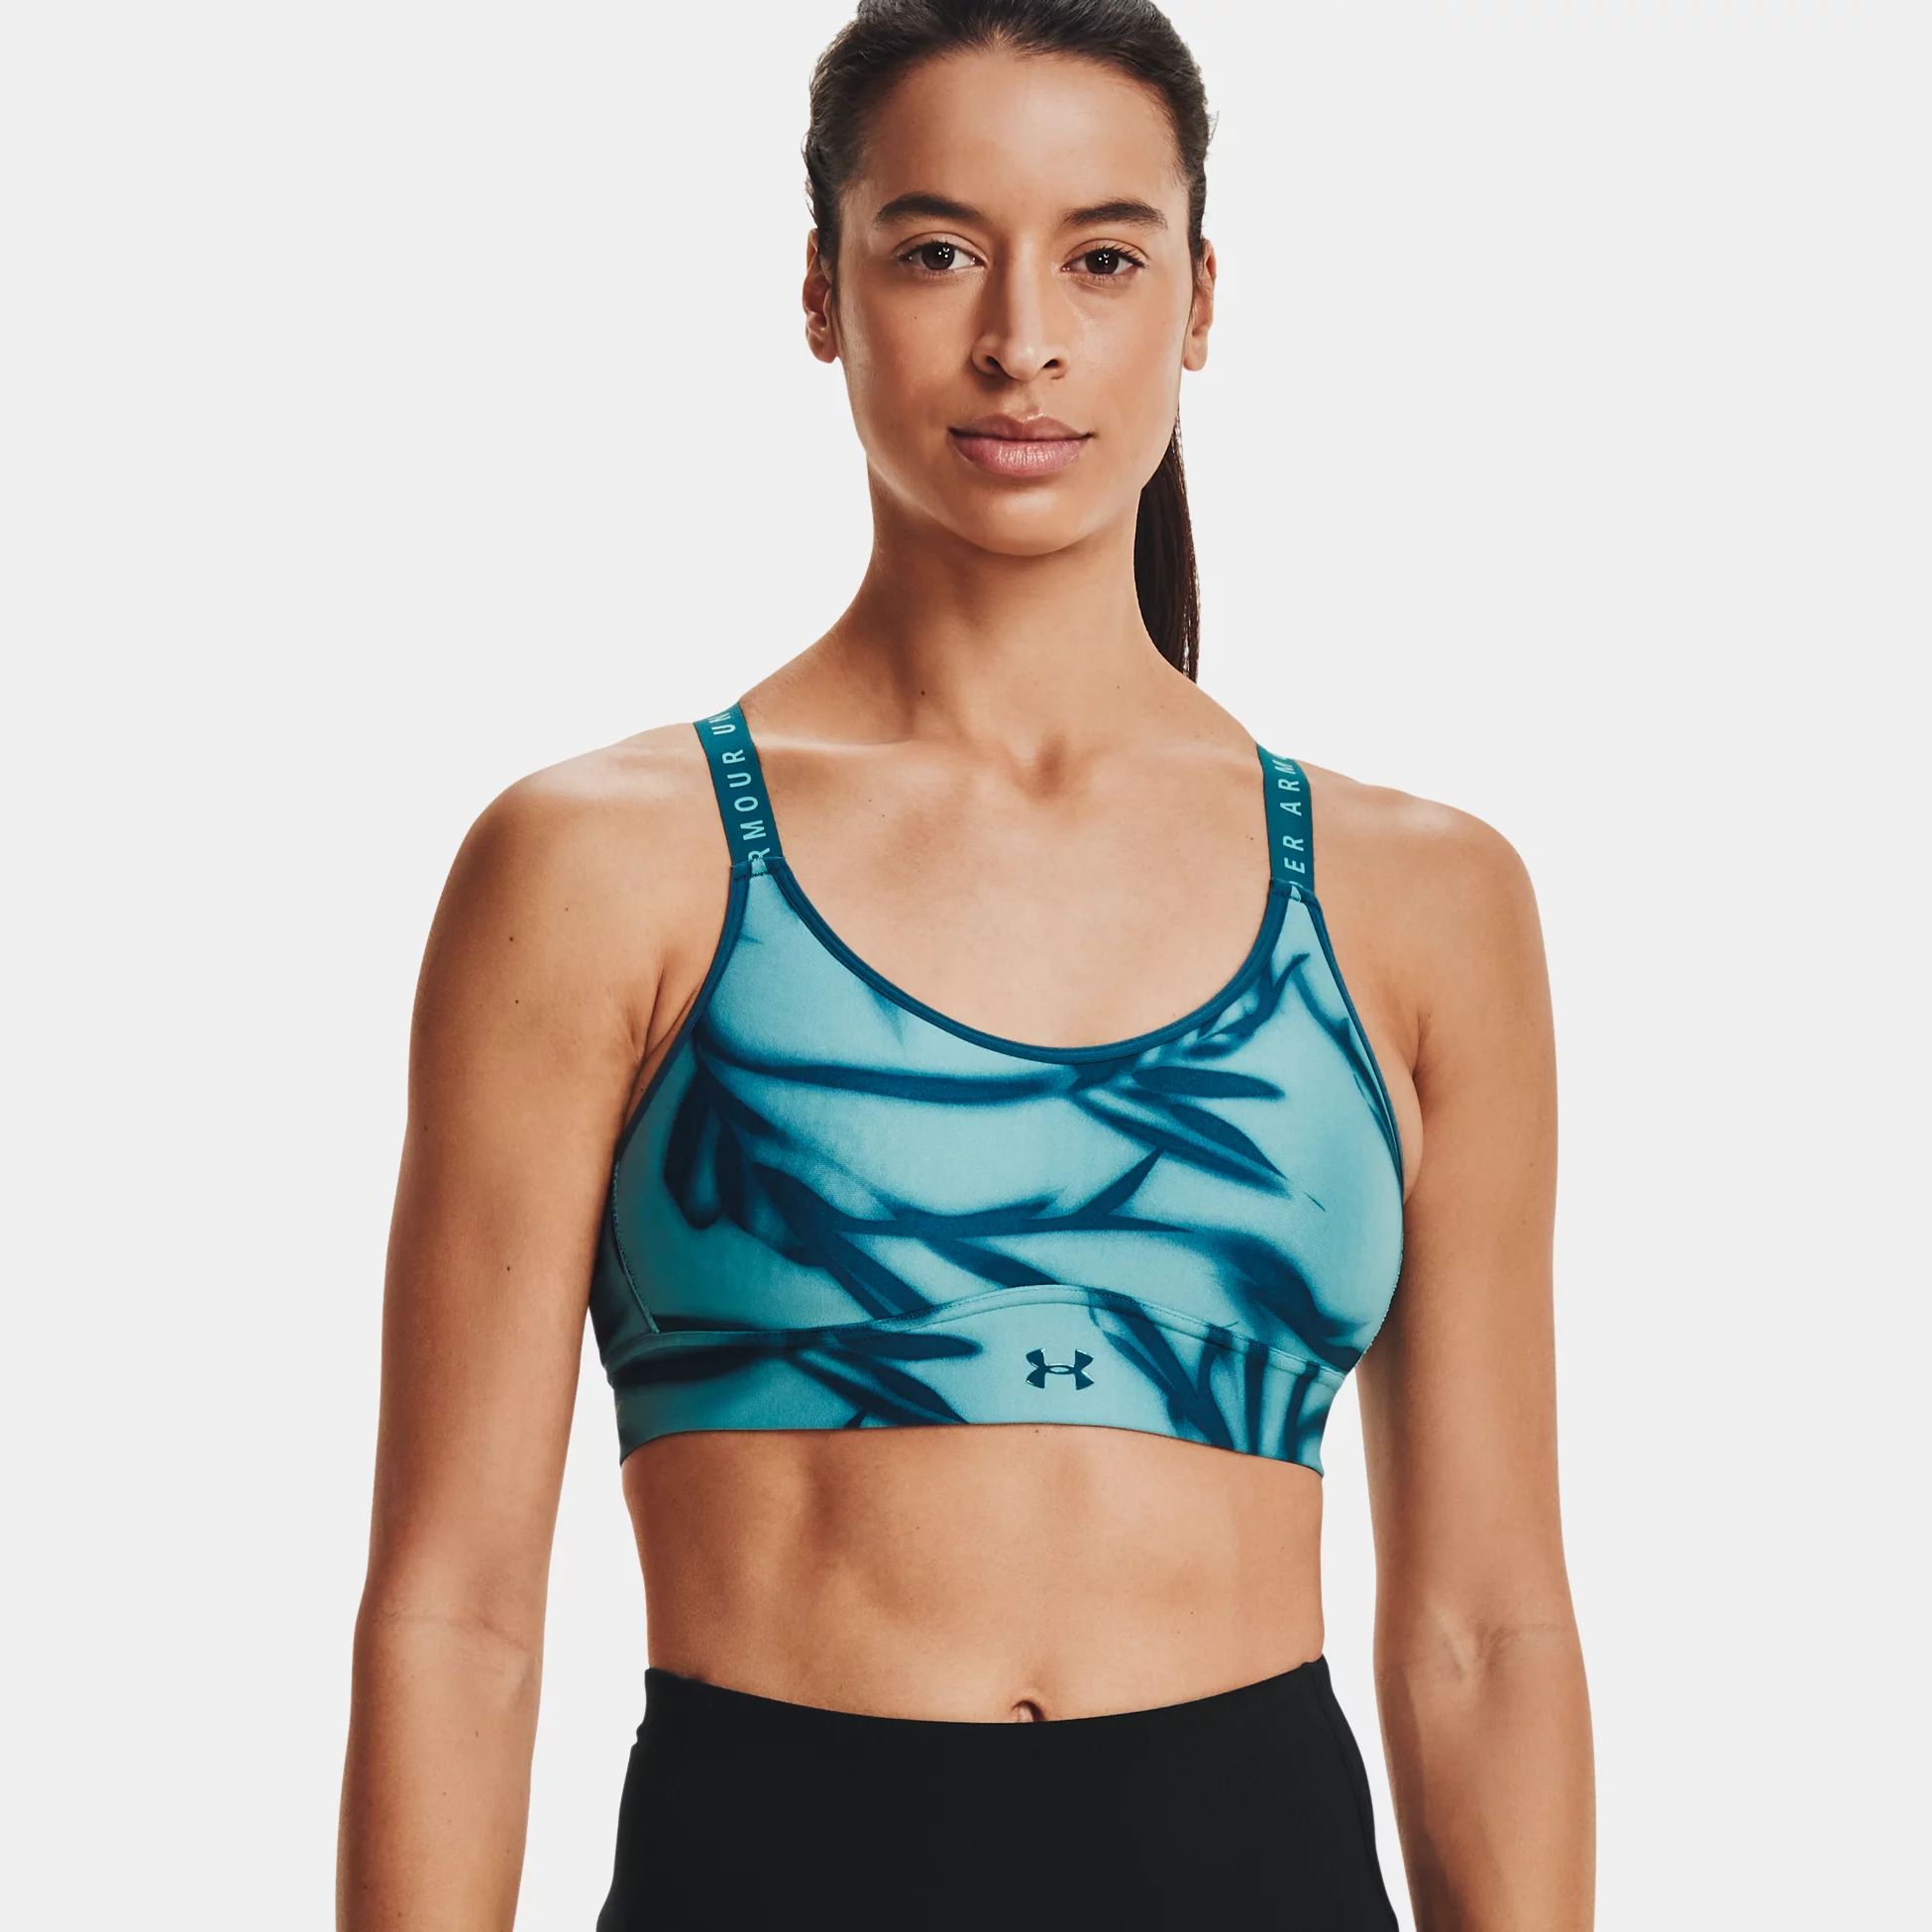 https://img2.sportconcept.com/backend_nou/content/images/-under-armourua-infinity-mid-printed-sports-bra-1157-20210429105258.jpg